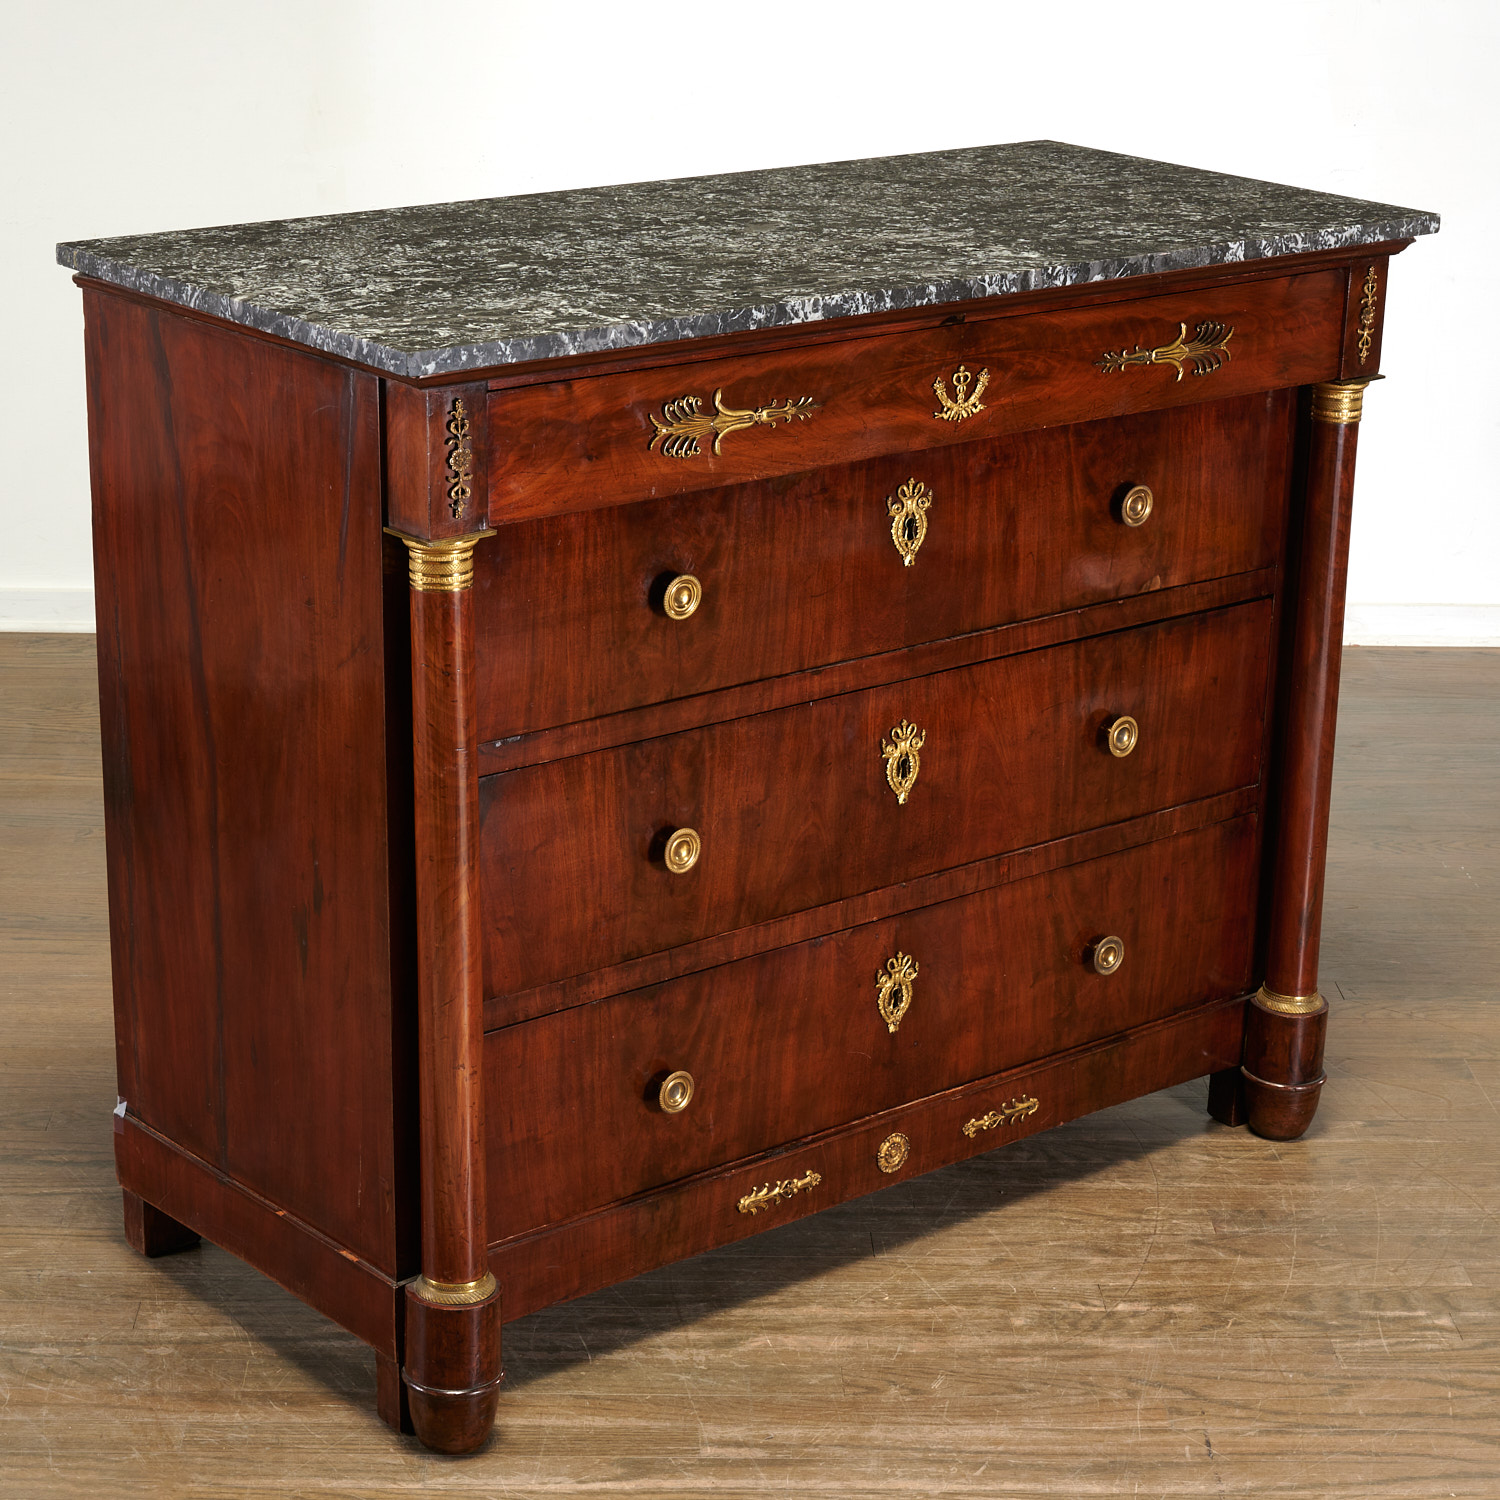 FRENCH EMPIRE MARBLE TOP MAHOGANY 2ceacb